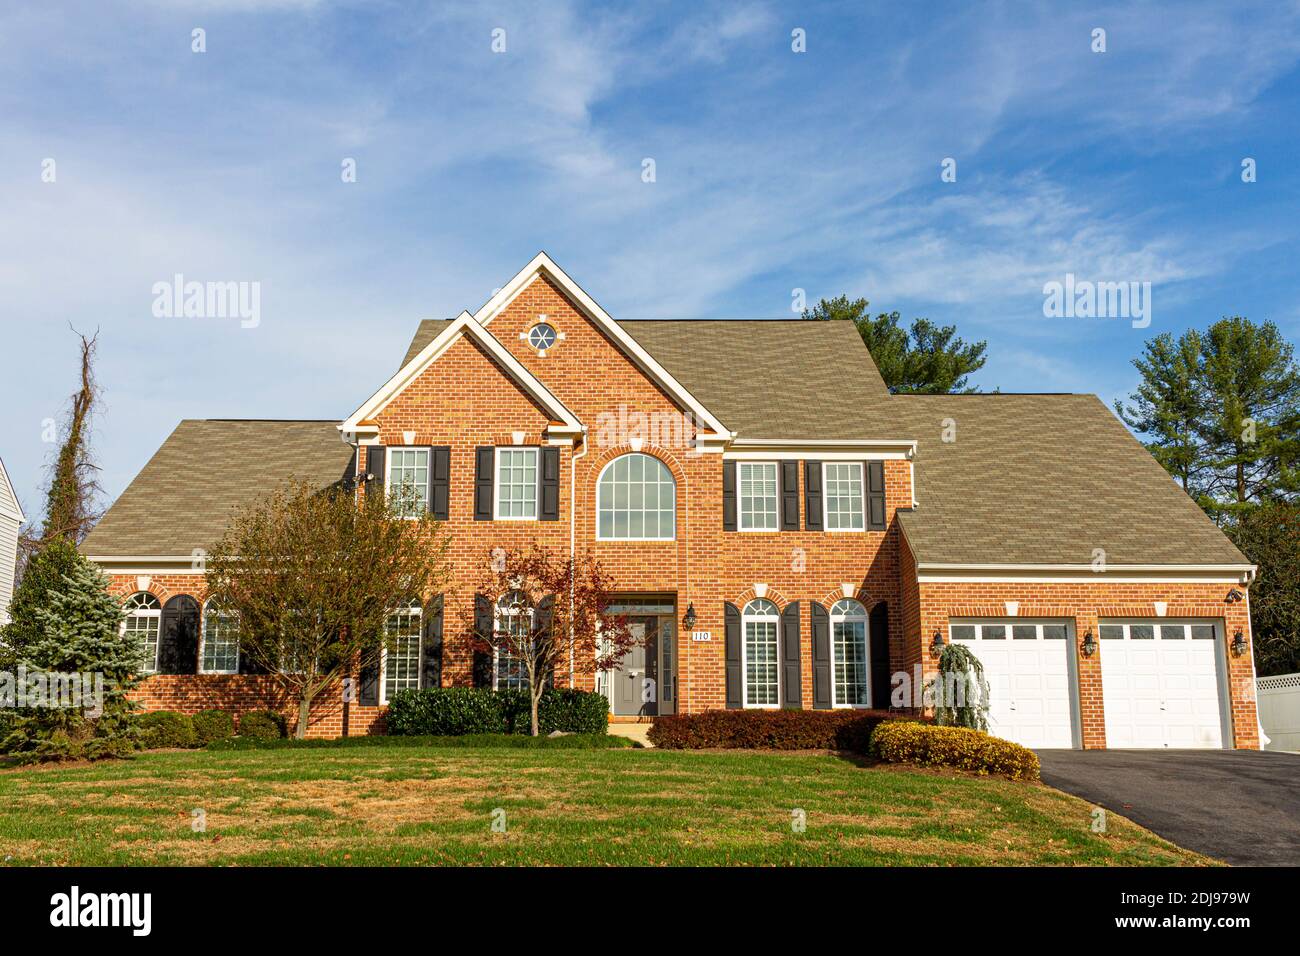 Rockville, Maryland USA 11-10-2020: A modern spacious upscale two story brick single family home with a large front yard and two car attached garage. Stock Photo